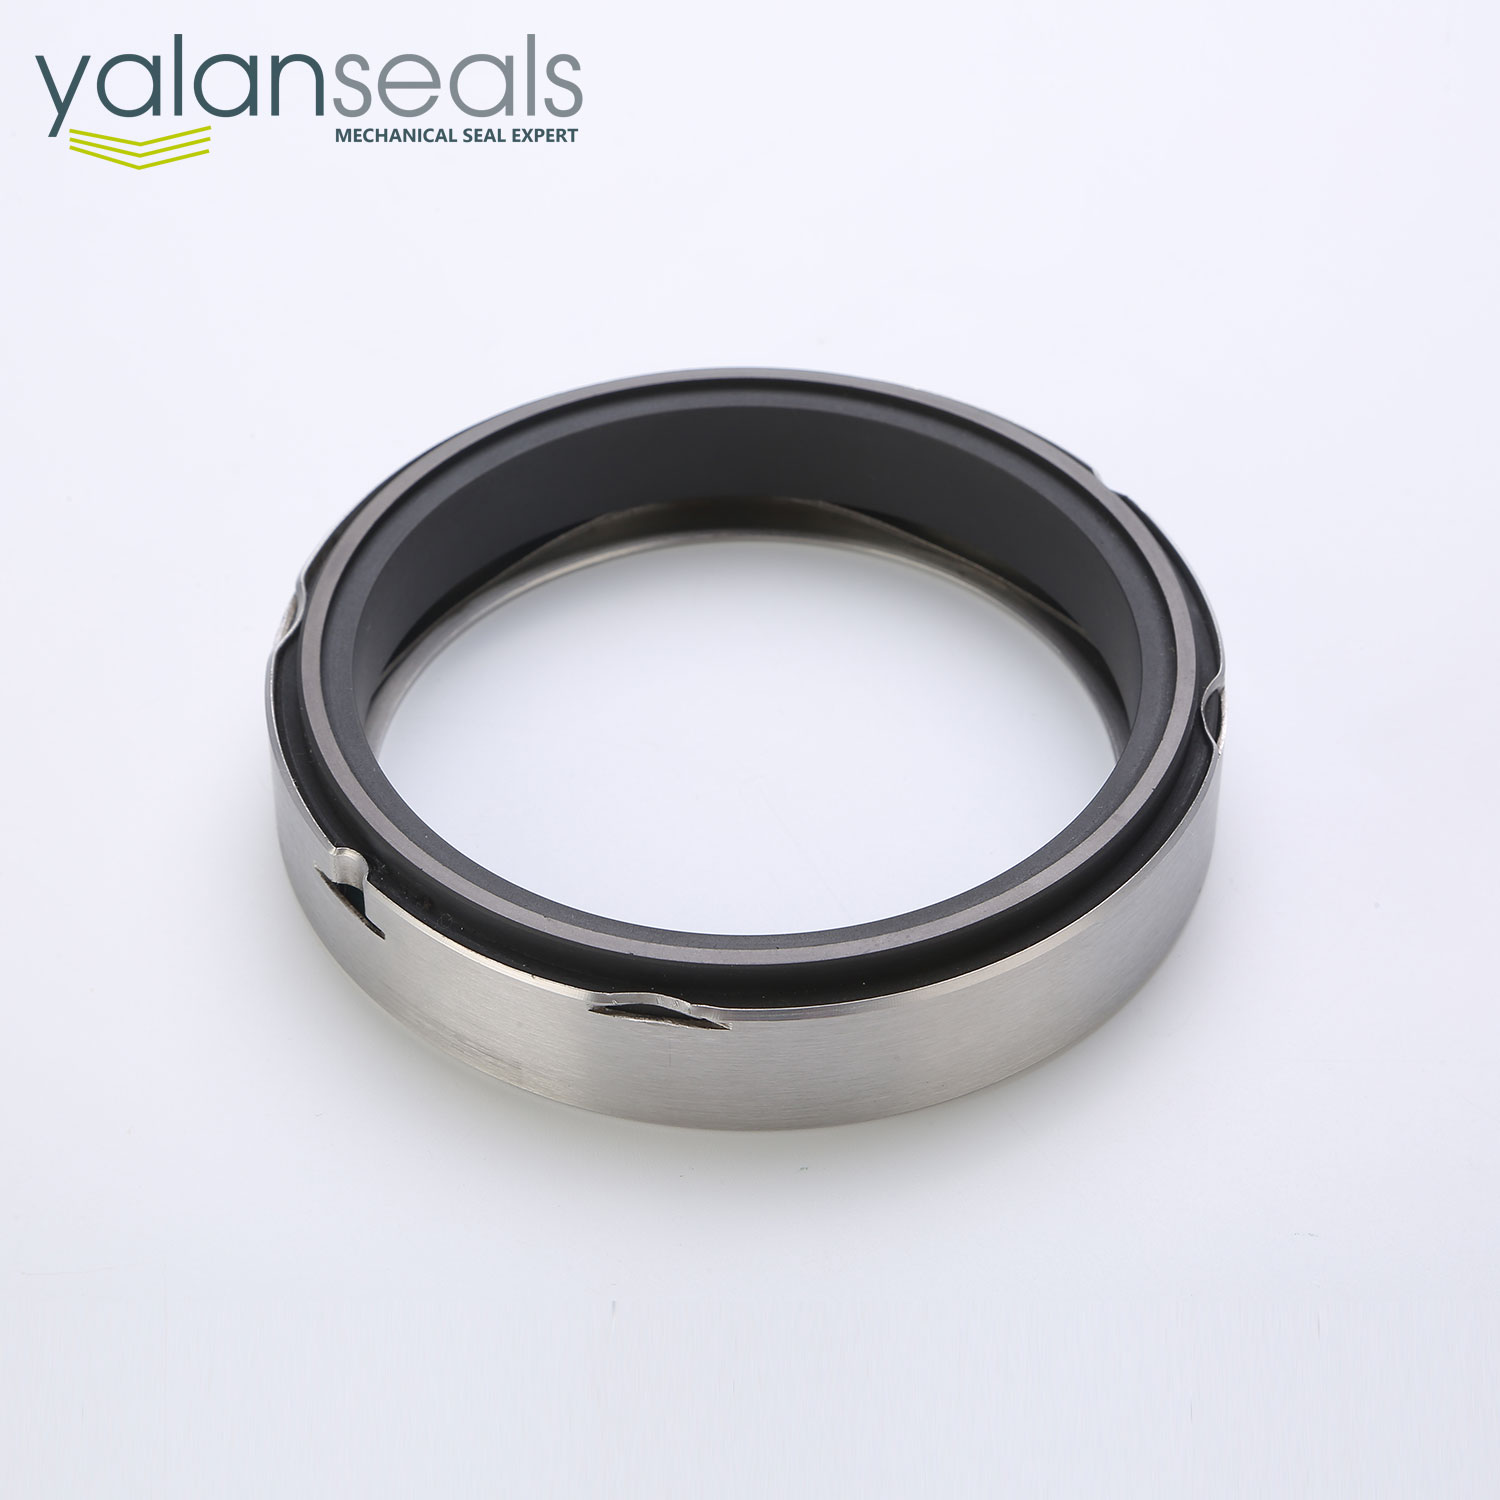 H6 Wave Spring Super Thin and Balanced High Speed Mechanical Seal